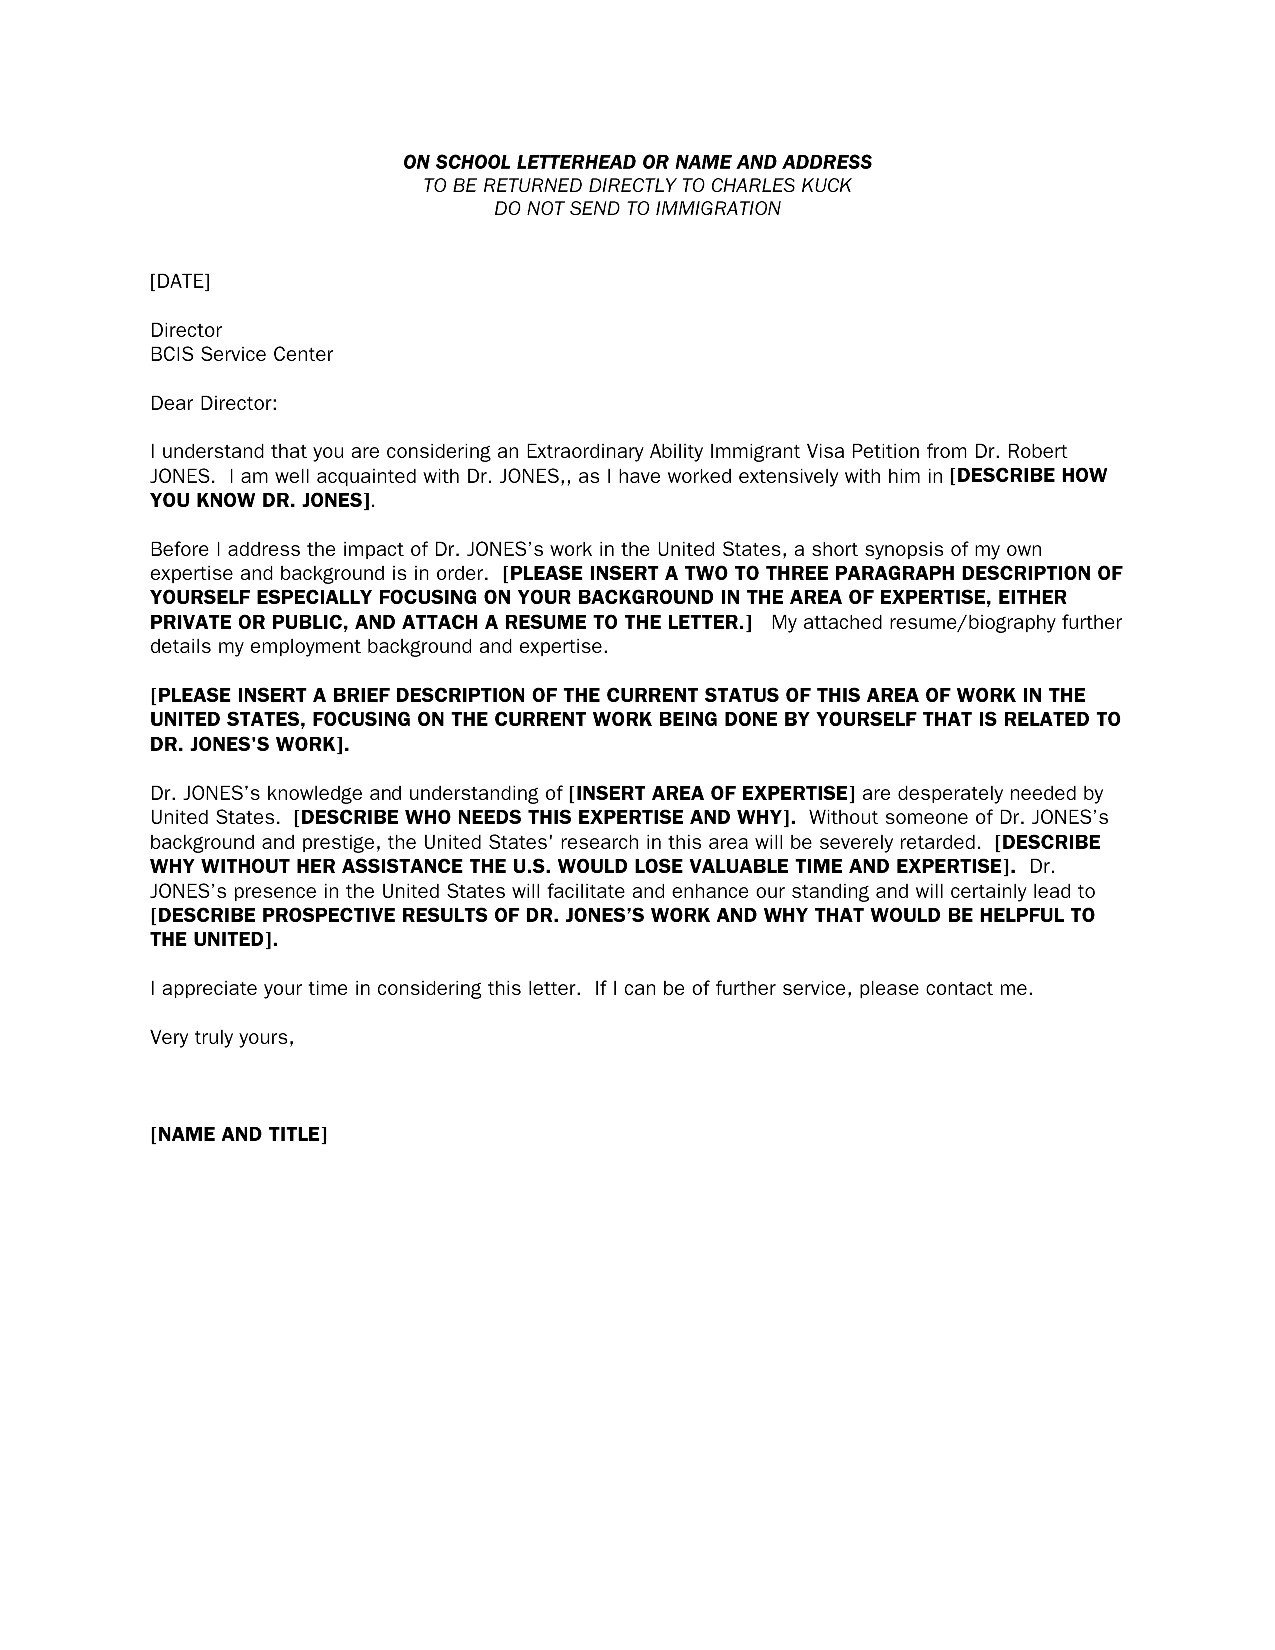 Immigration Recommendation Letter Sample New Immigration Re Mendation Letter for A Family Member